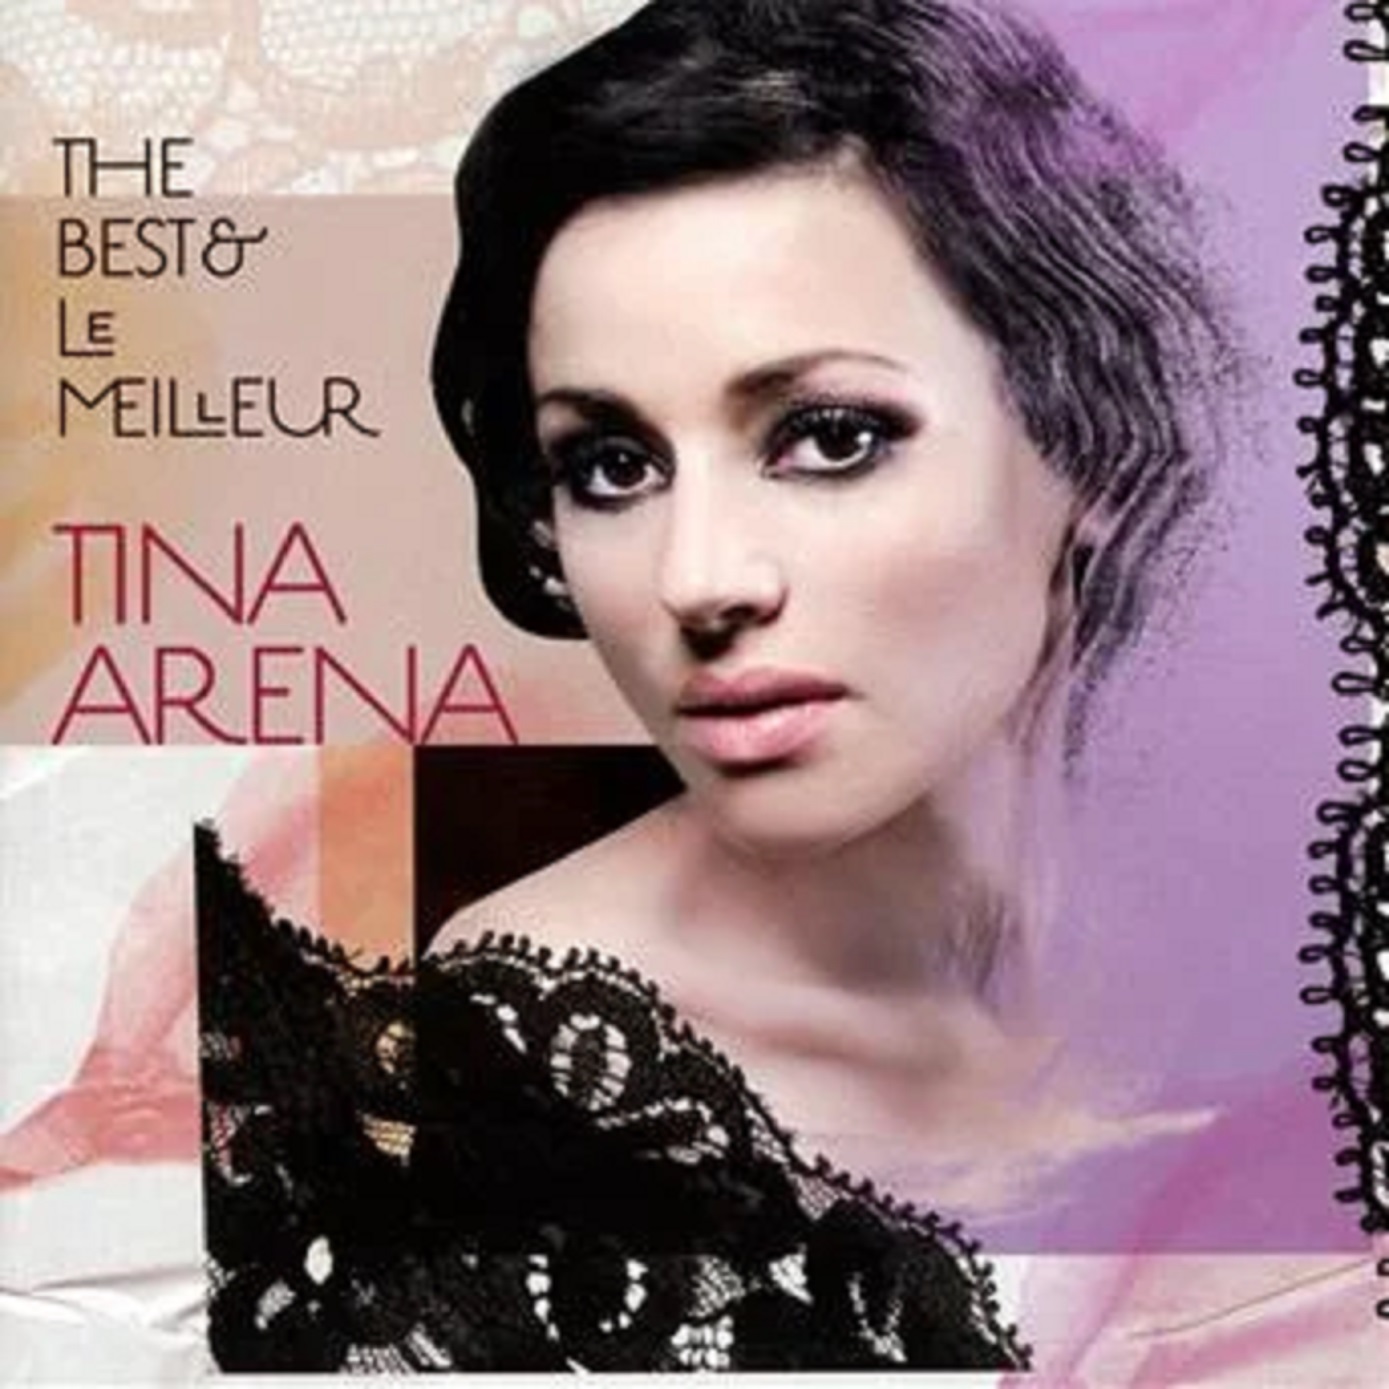 The Best of & Le Meilleur | Tina Arena